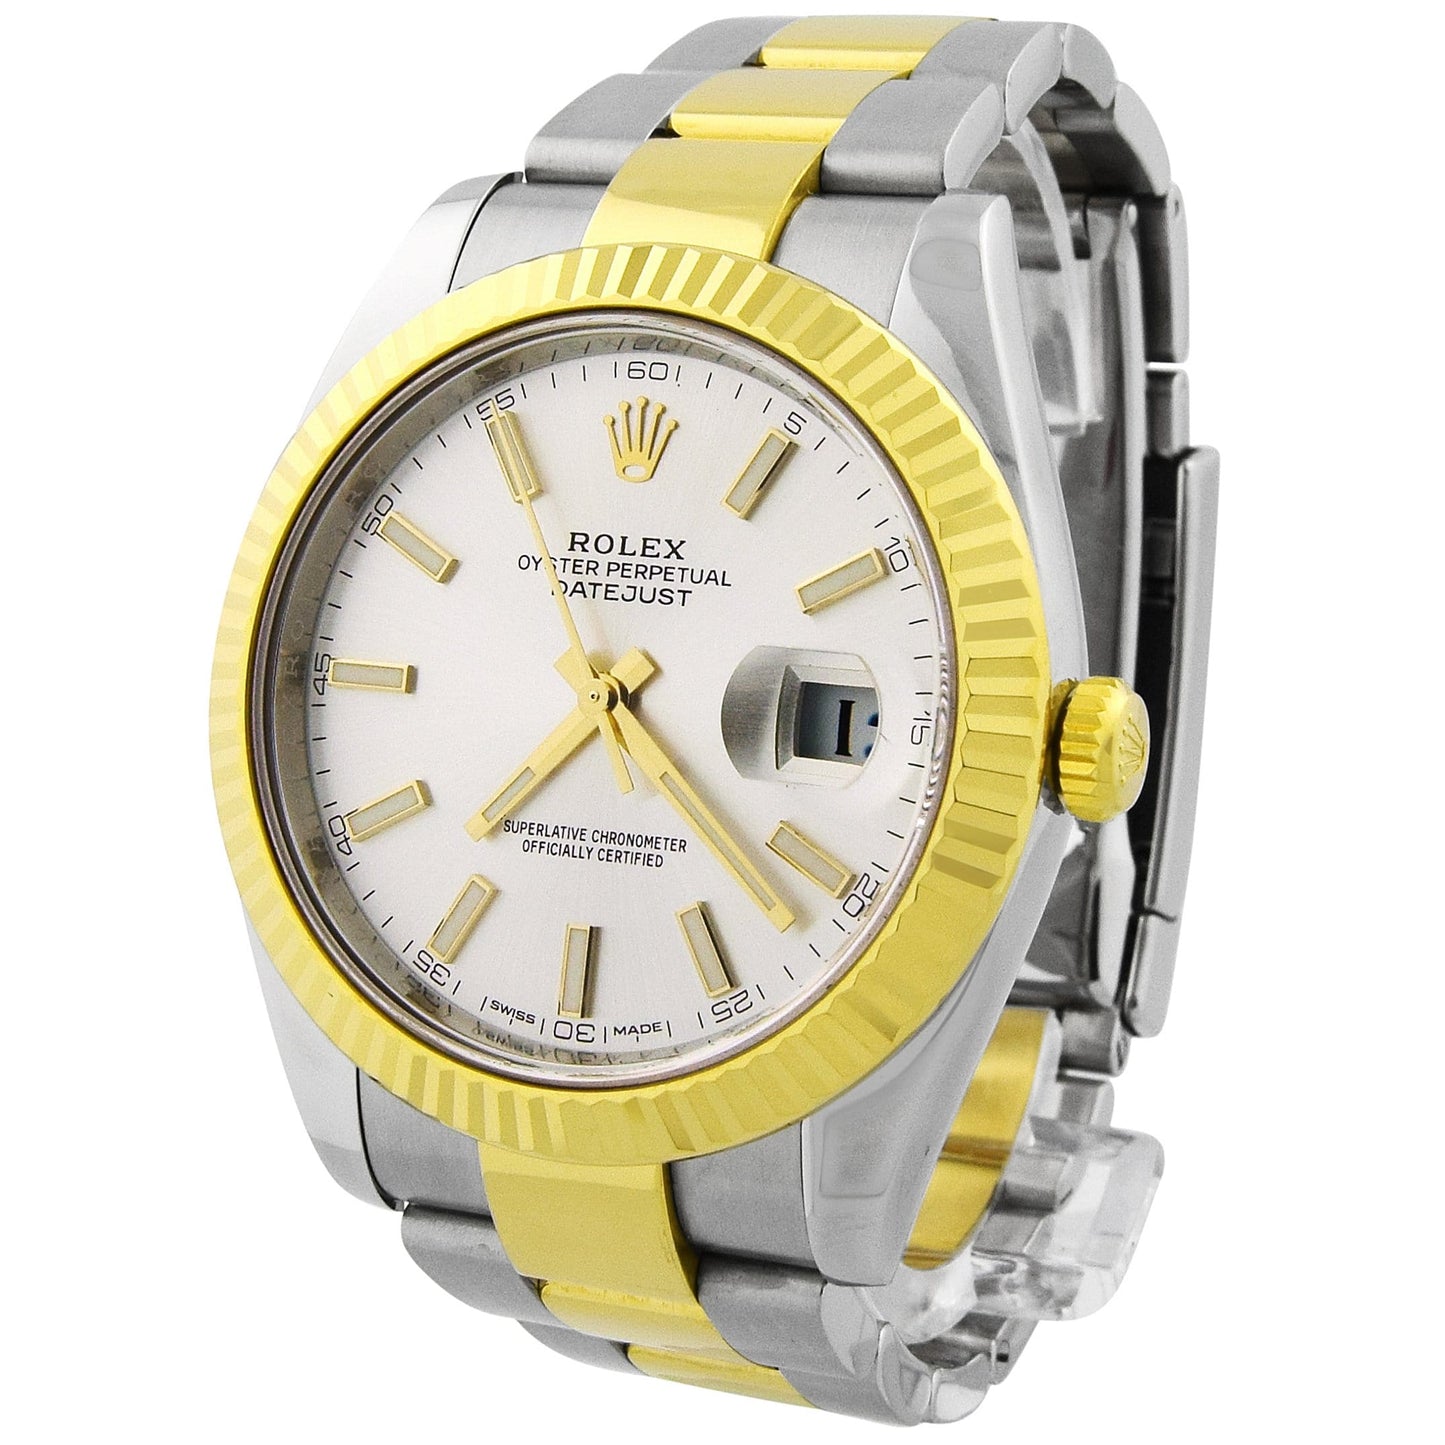 Rolex Datejust TT Stainless Steel & Yellow Gold 41mm Silver Stick Dial Watch Reference#: 126333